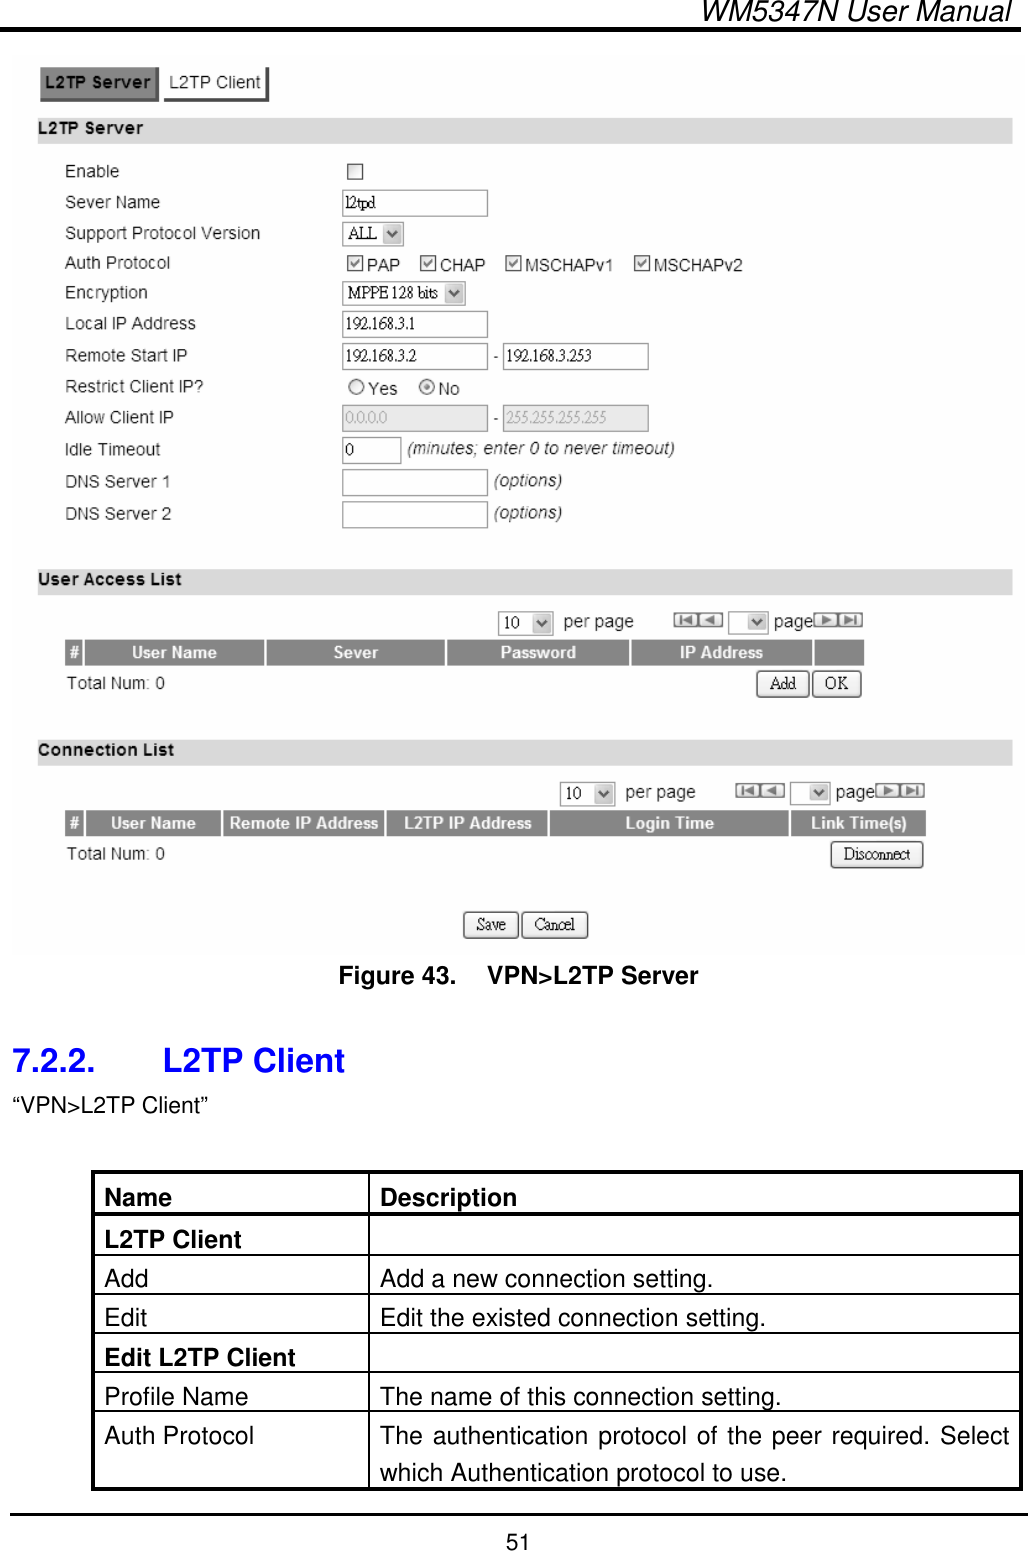  WM5347N User Manual  51  Figure 43.   VPN&gt;L2TP Server  7.2.2.  L2TP Client “VPN&gt;L2TP Client”  Name  Description L2TP Client   Add  Add a new connection setting. Edit  Edit the existed connection setting. Edit L2TP Client   Profile Name  The name of this connection setting. Auth Protocol  The authentication protocol of the peer required. Select which Authentication protocol to use. 